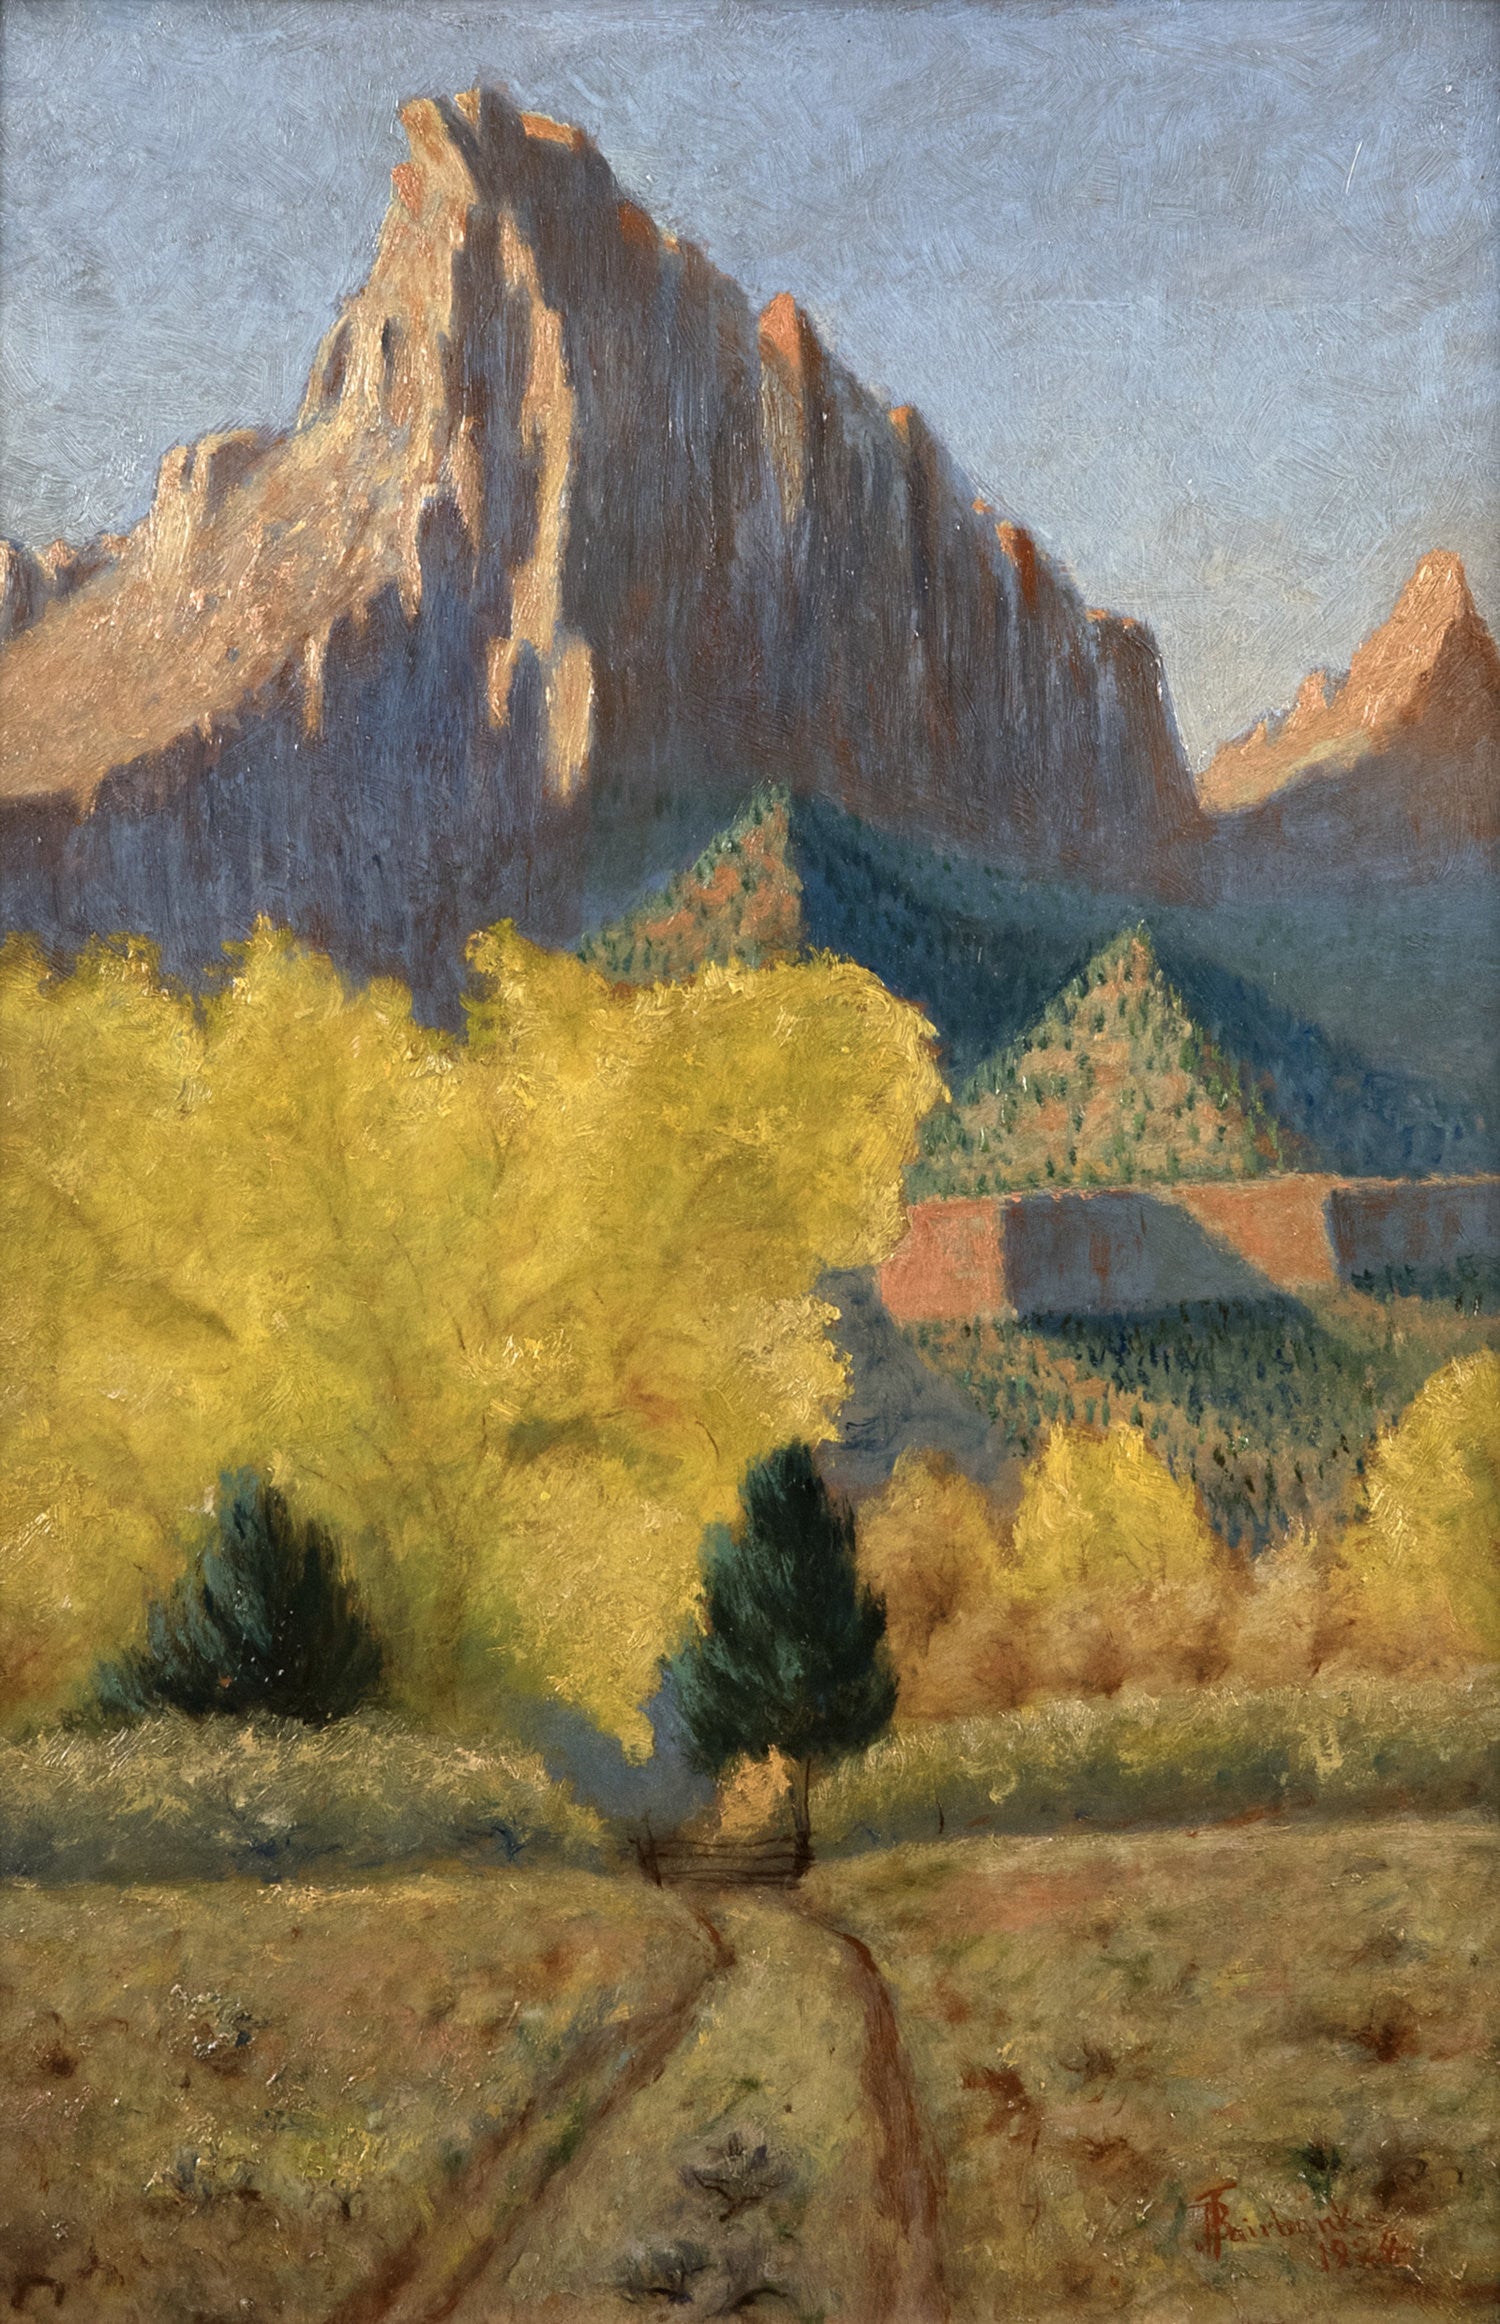 The Court of the Patriarchs, Zion National Park (1924) by JB Fairbanks